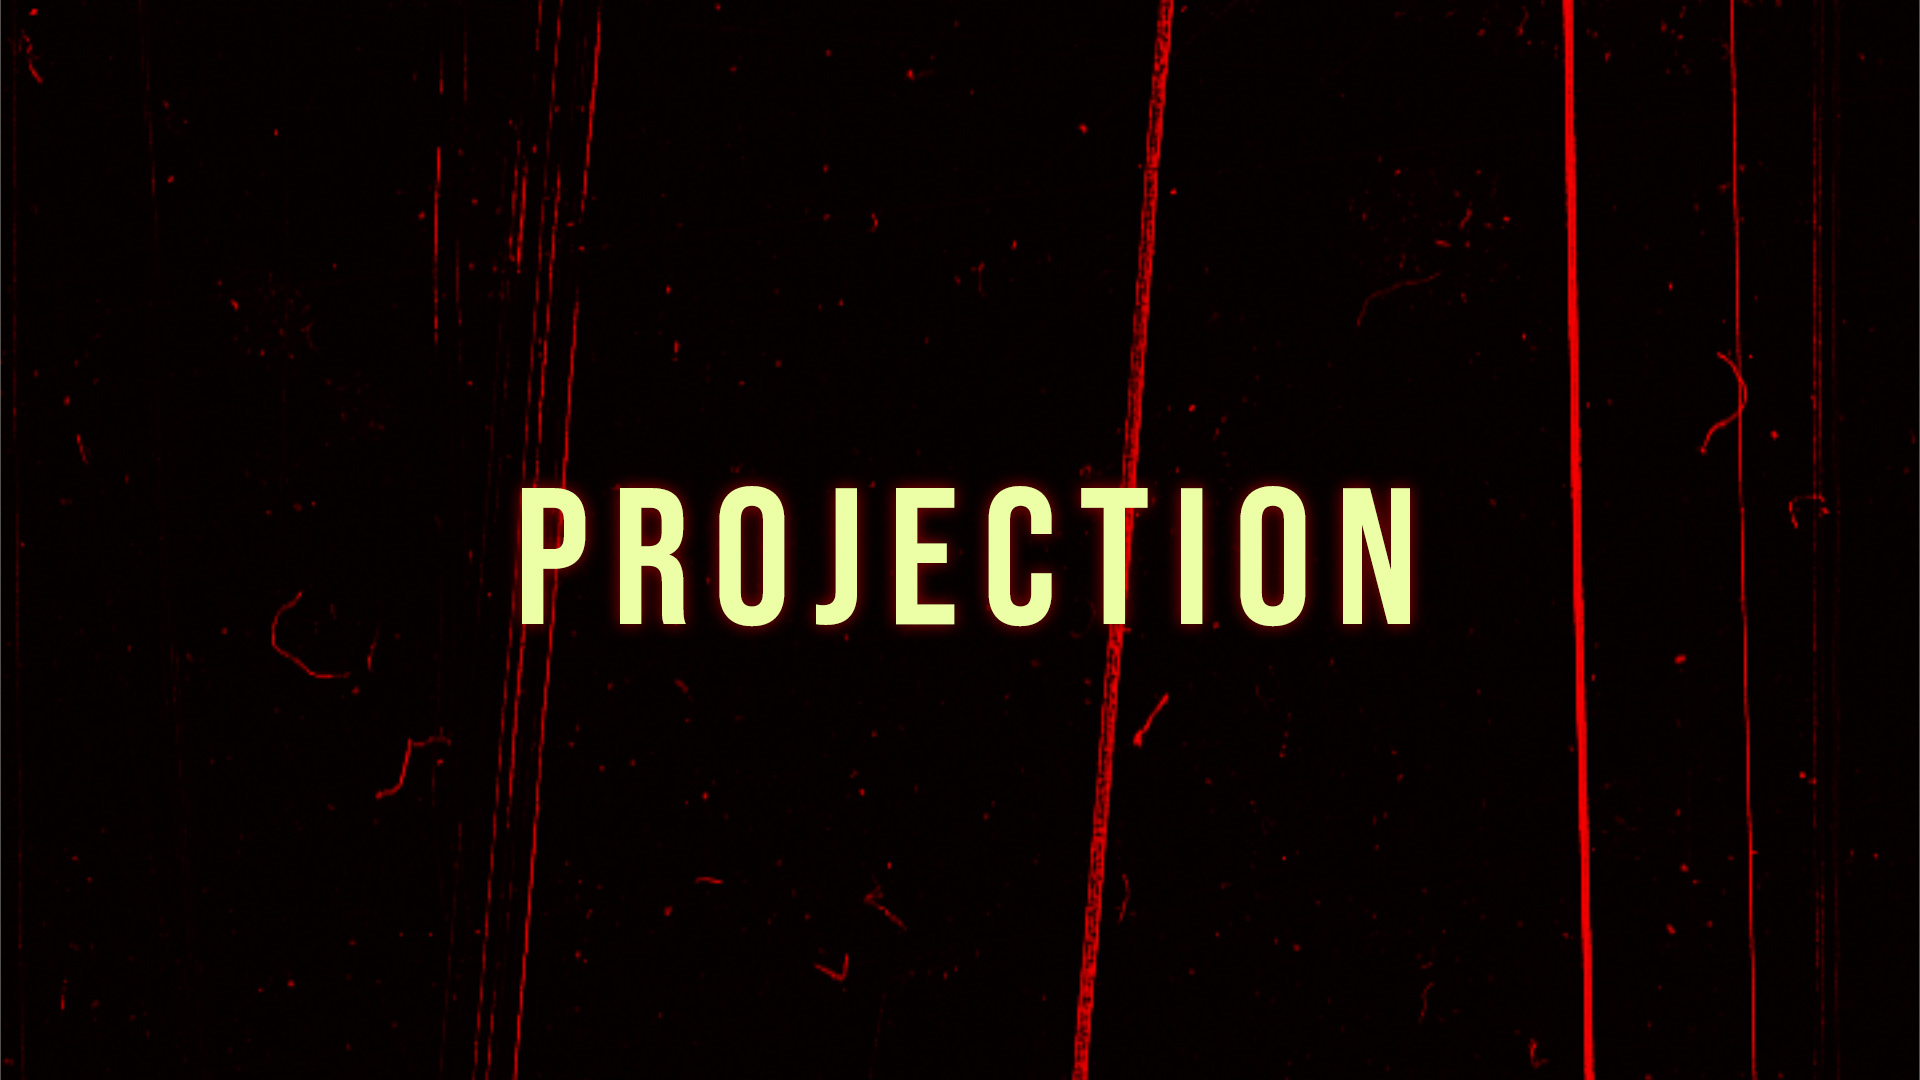 Projection